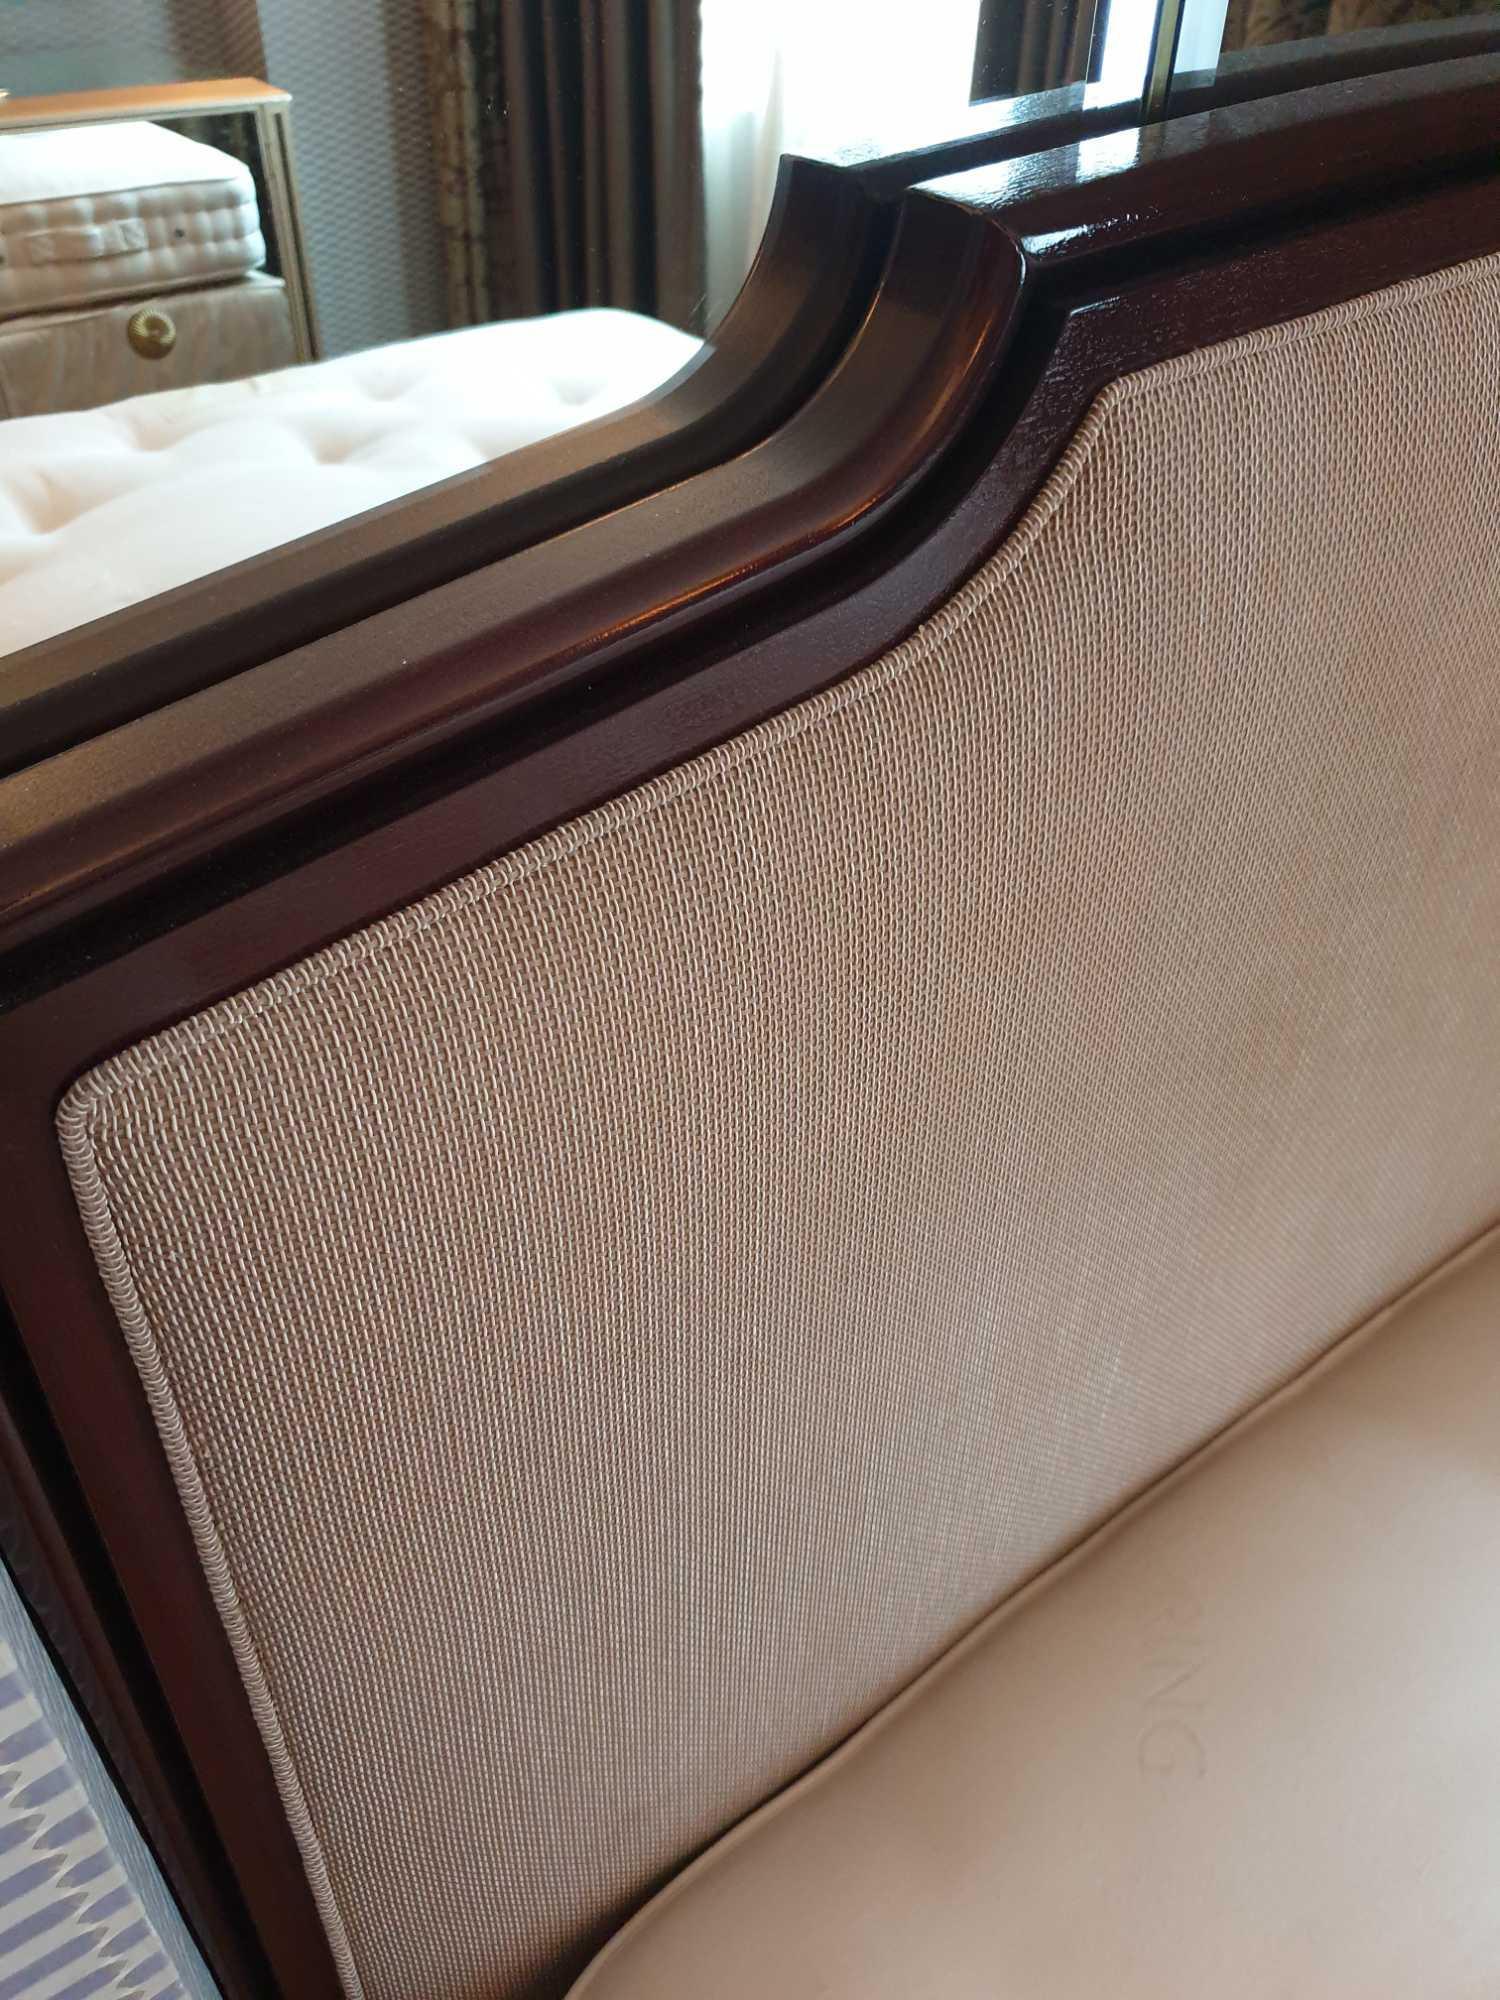 Headboard, Handcrafted With Nail Trim And Padded Textured Woven Upholstery (Room 416) - Image 2 of 2